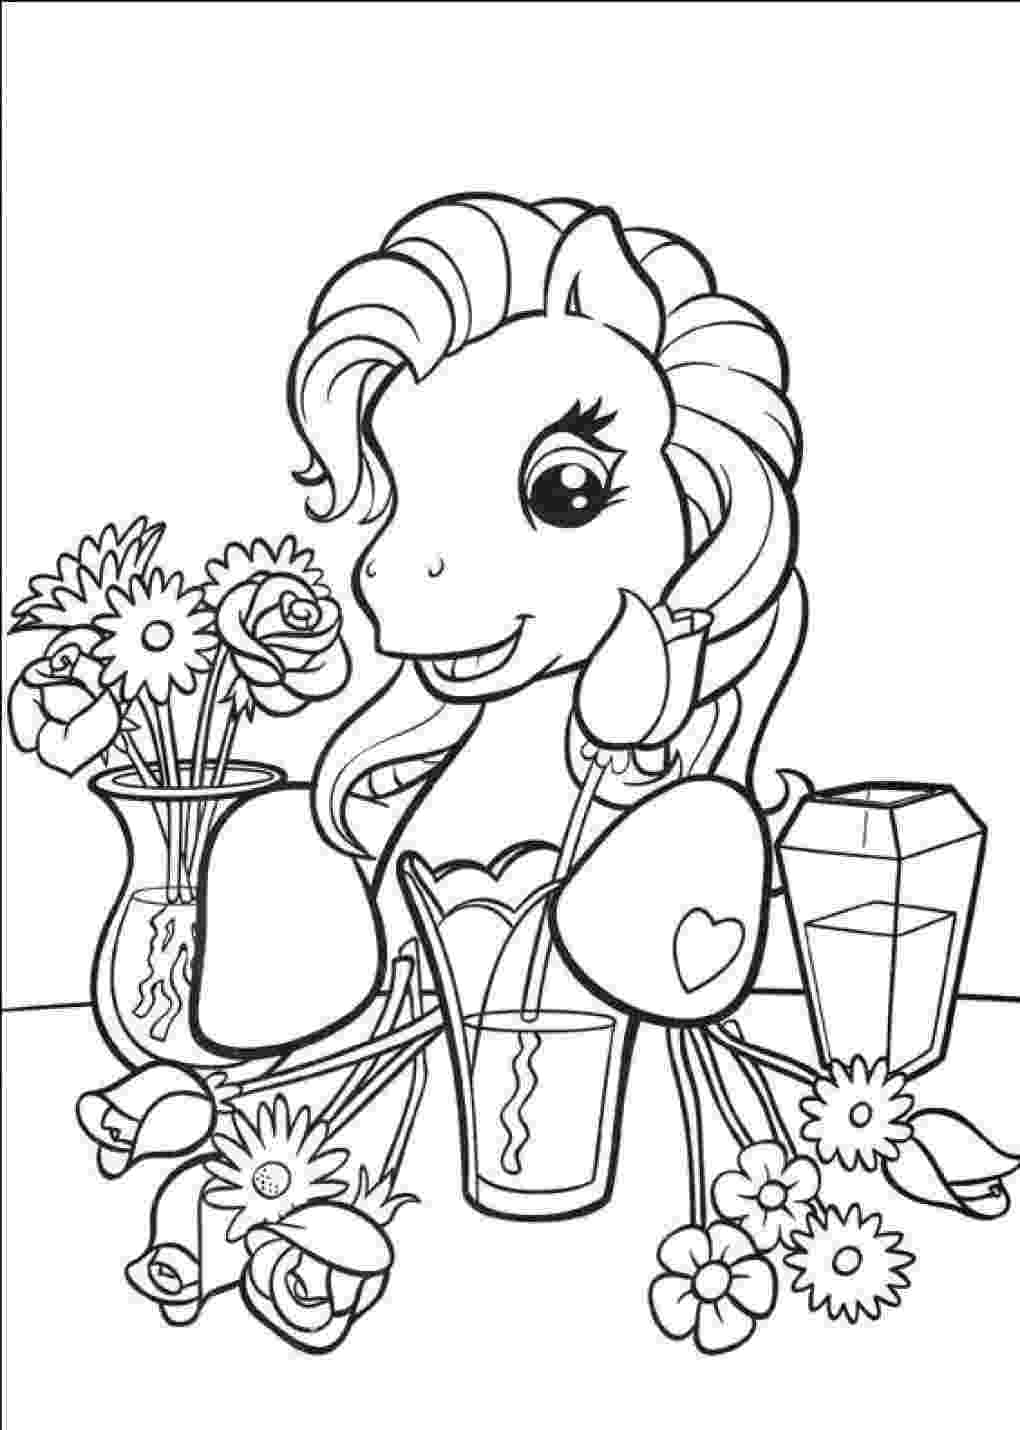 my little pony coloring pictures my little pony coloring pages max coloring coloring pony my little pictures coloring 